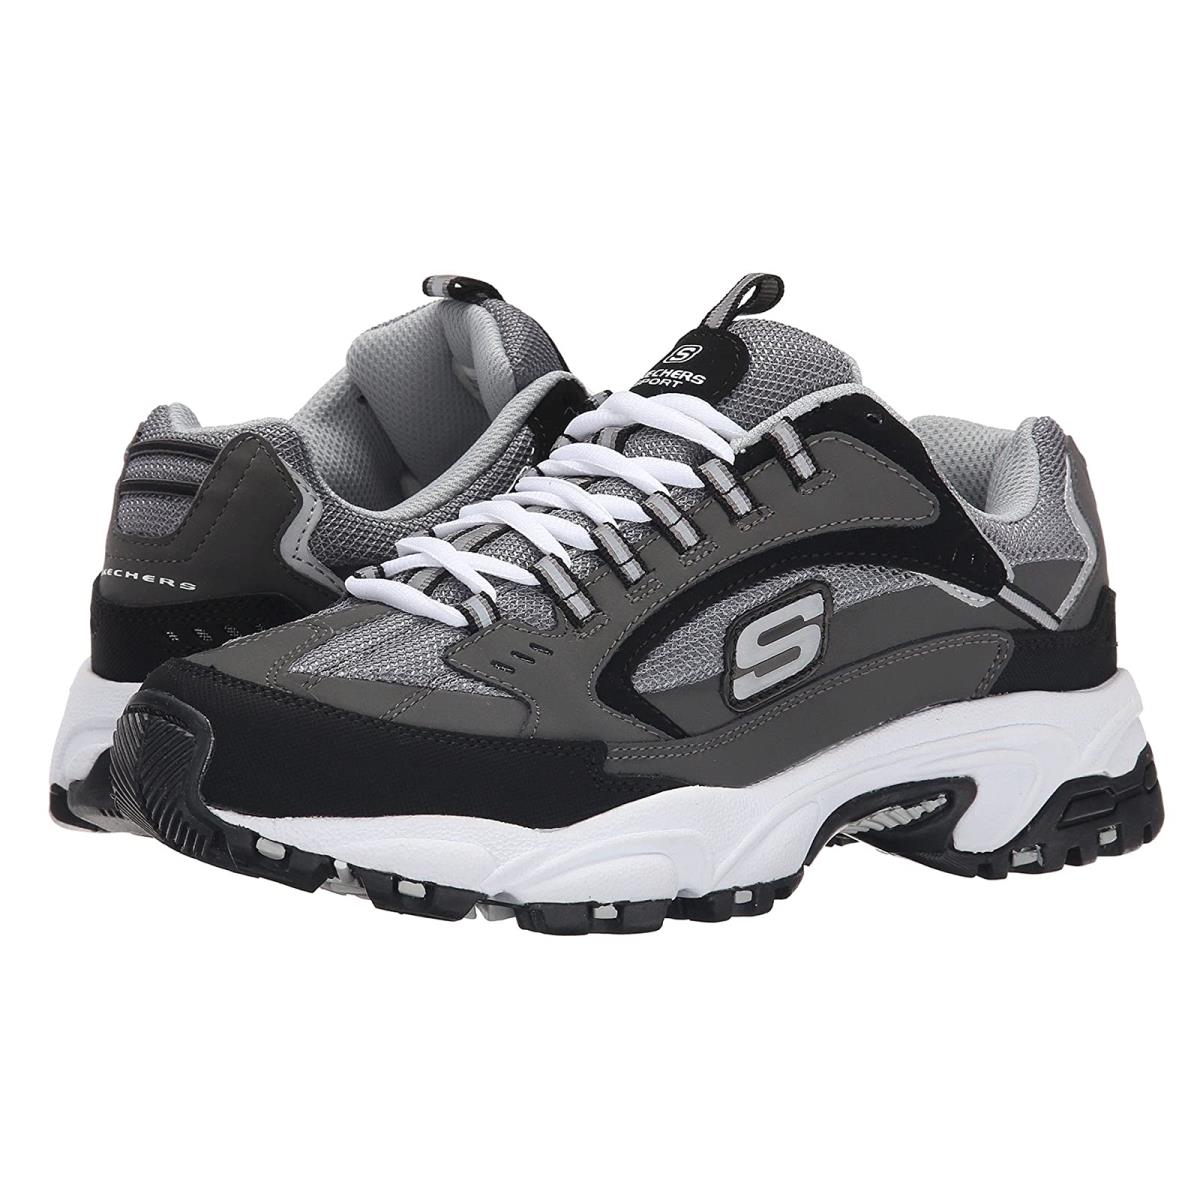 Man`s Sneakers Athletic Shoes Skechers Stamina Cutback Charcoal/Black